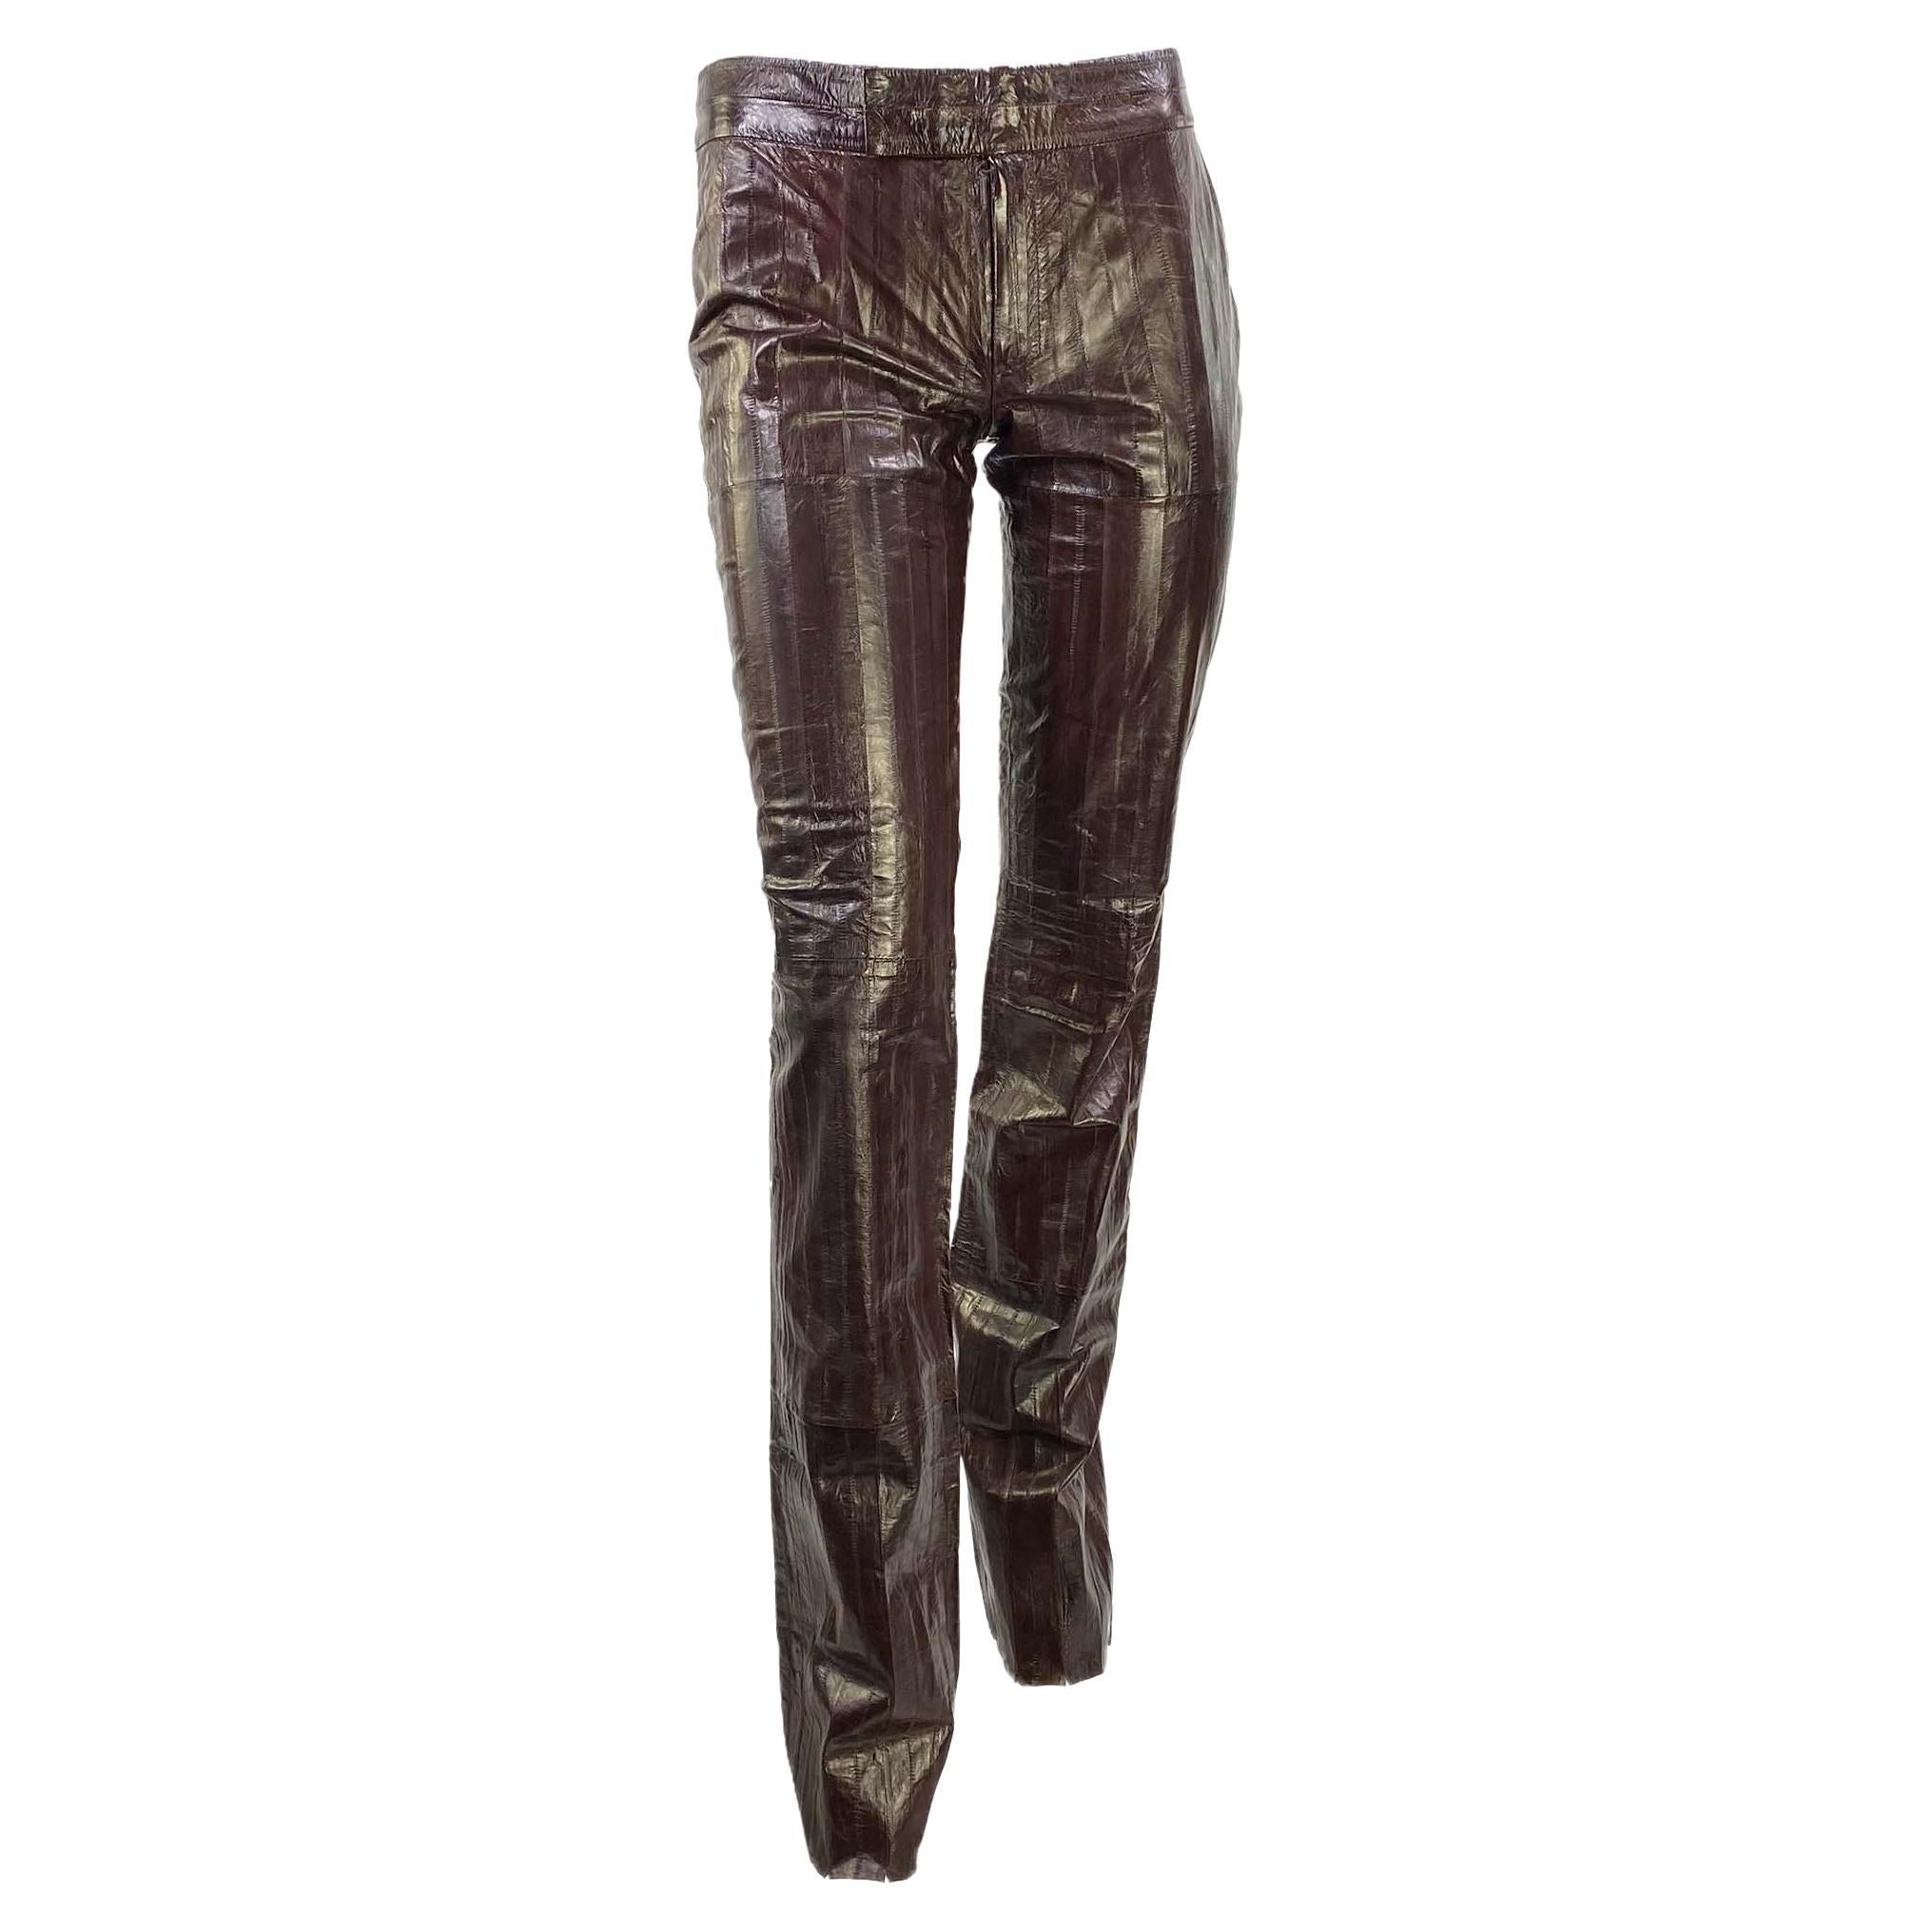 Early 2000s Gucci by Tom Ford Burgundy Eel Skin Leather Pants For Sale